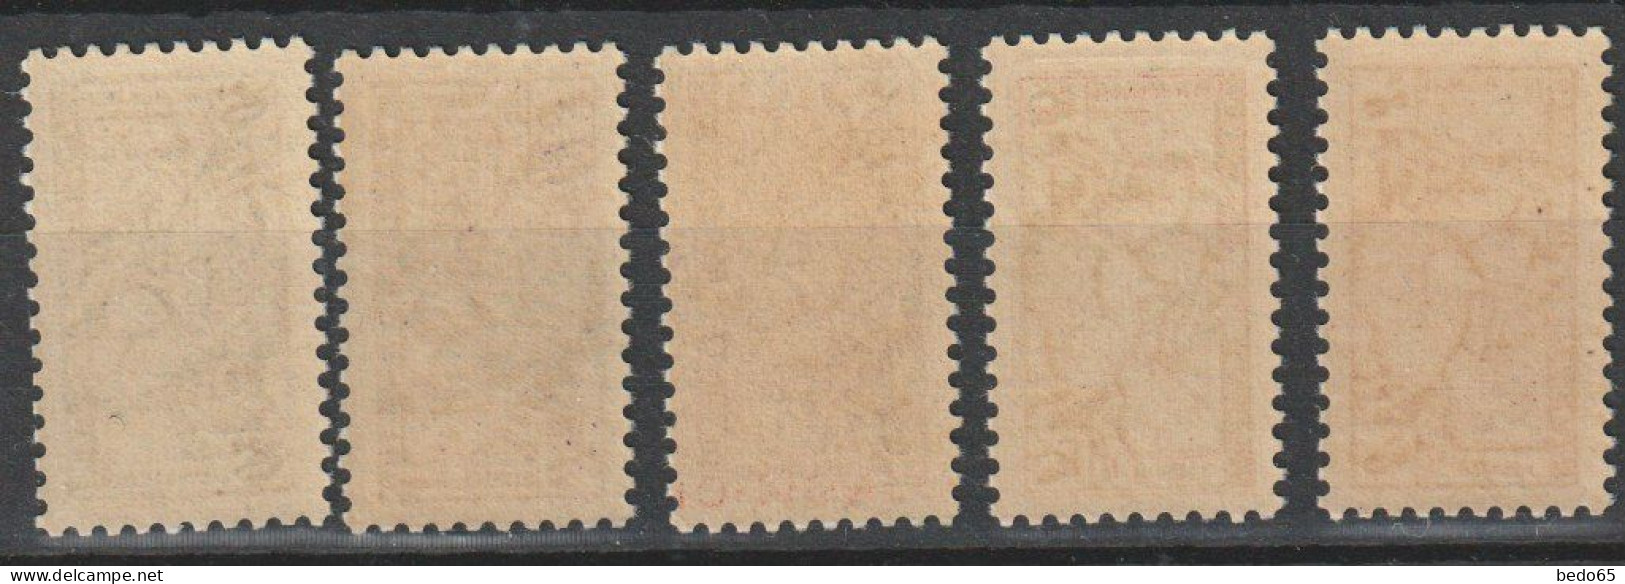 SERIE SCEAU DU PRINCE N° 371/75  NEUF** LUXE  / MNH - Unused Stamps